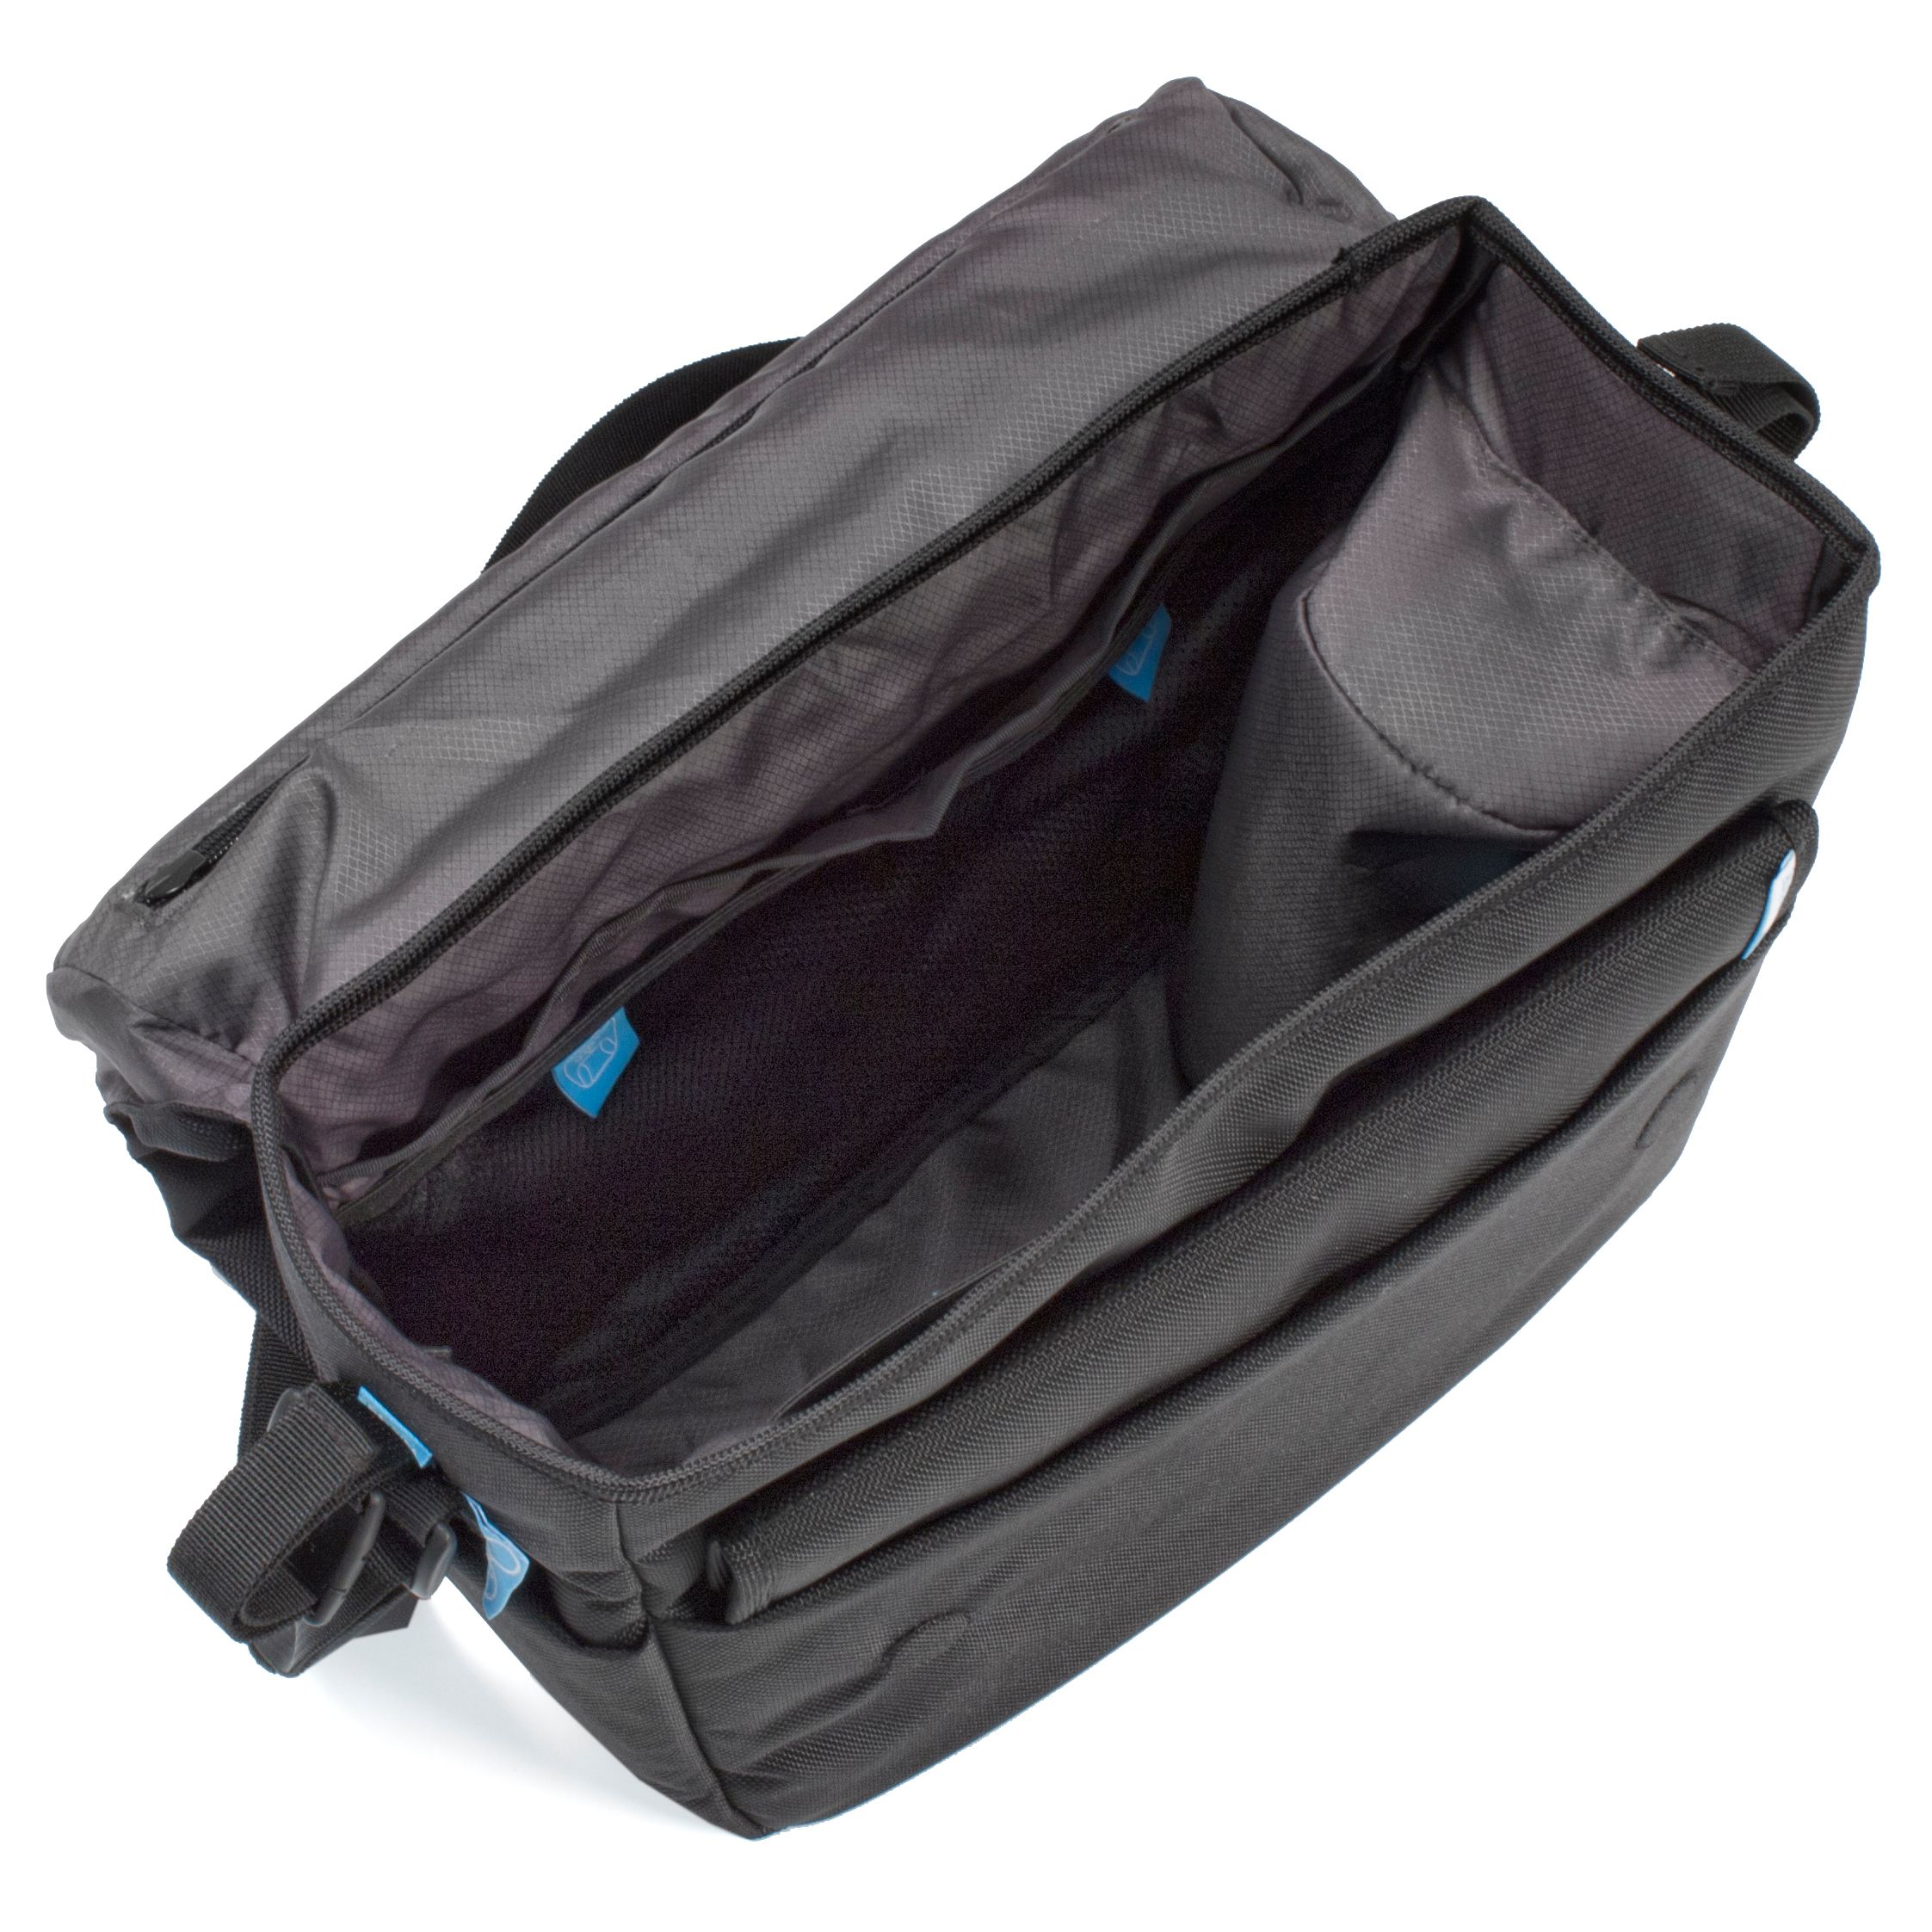 uppababy changing backpack review